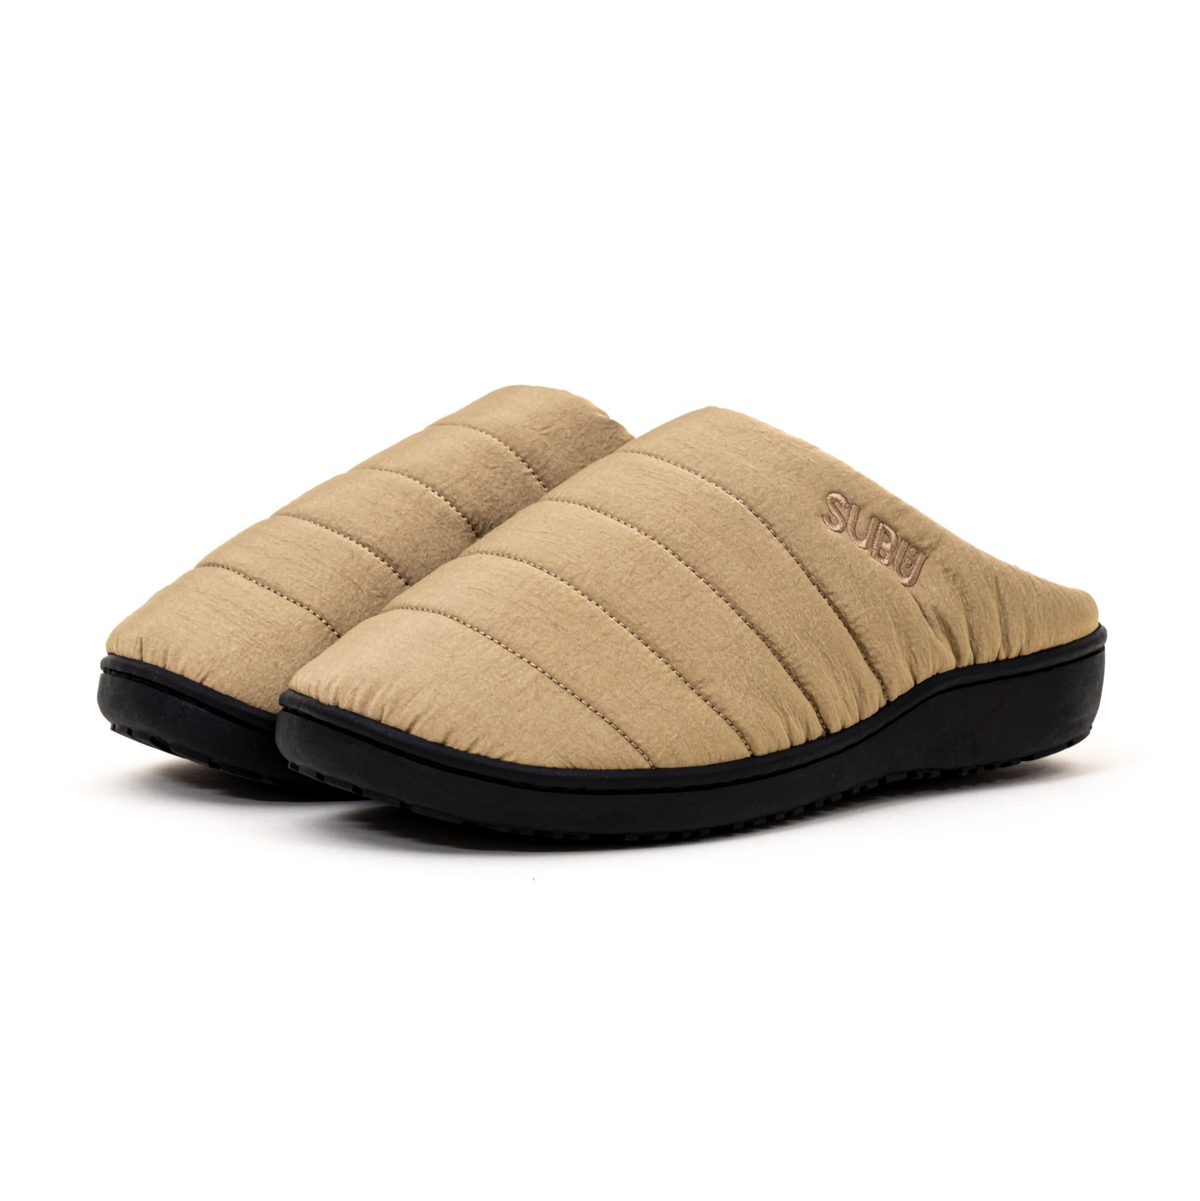 SUBU, Fall & Winter Slippers Beige, Size, 0, Slippers,